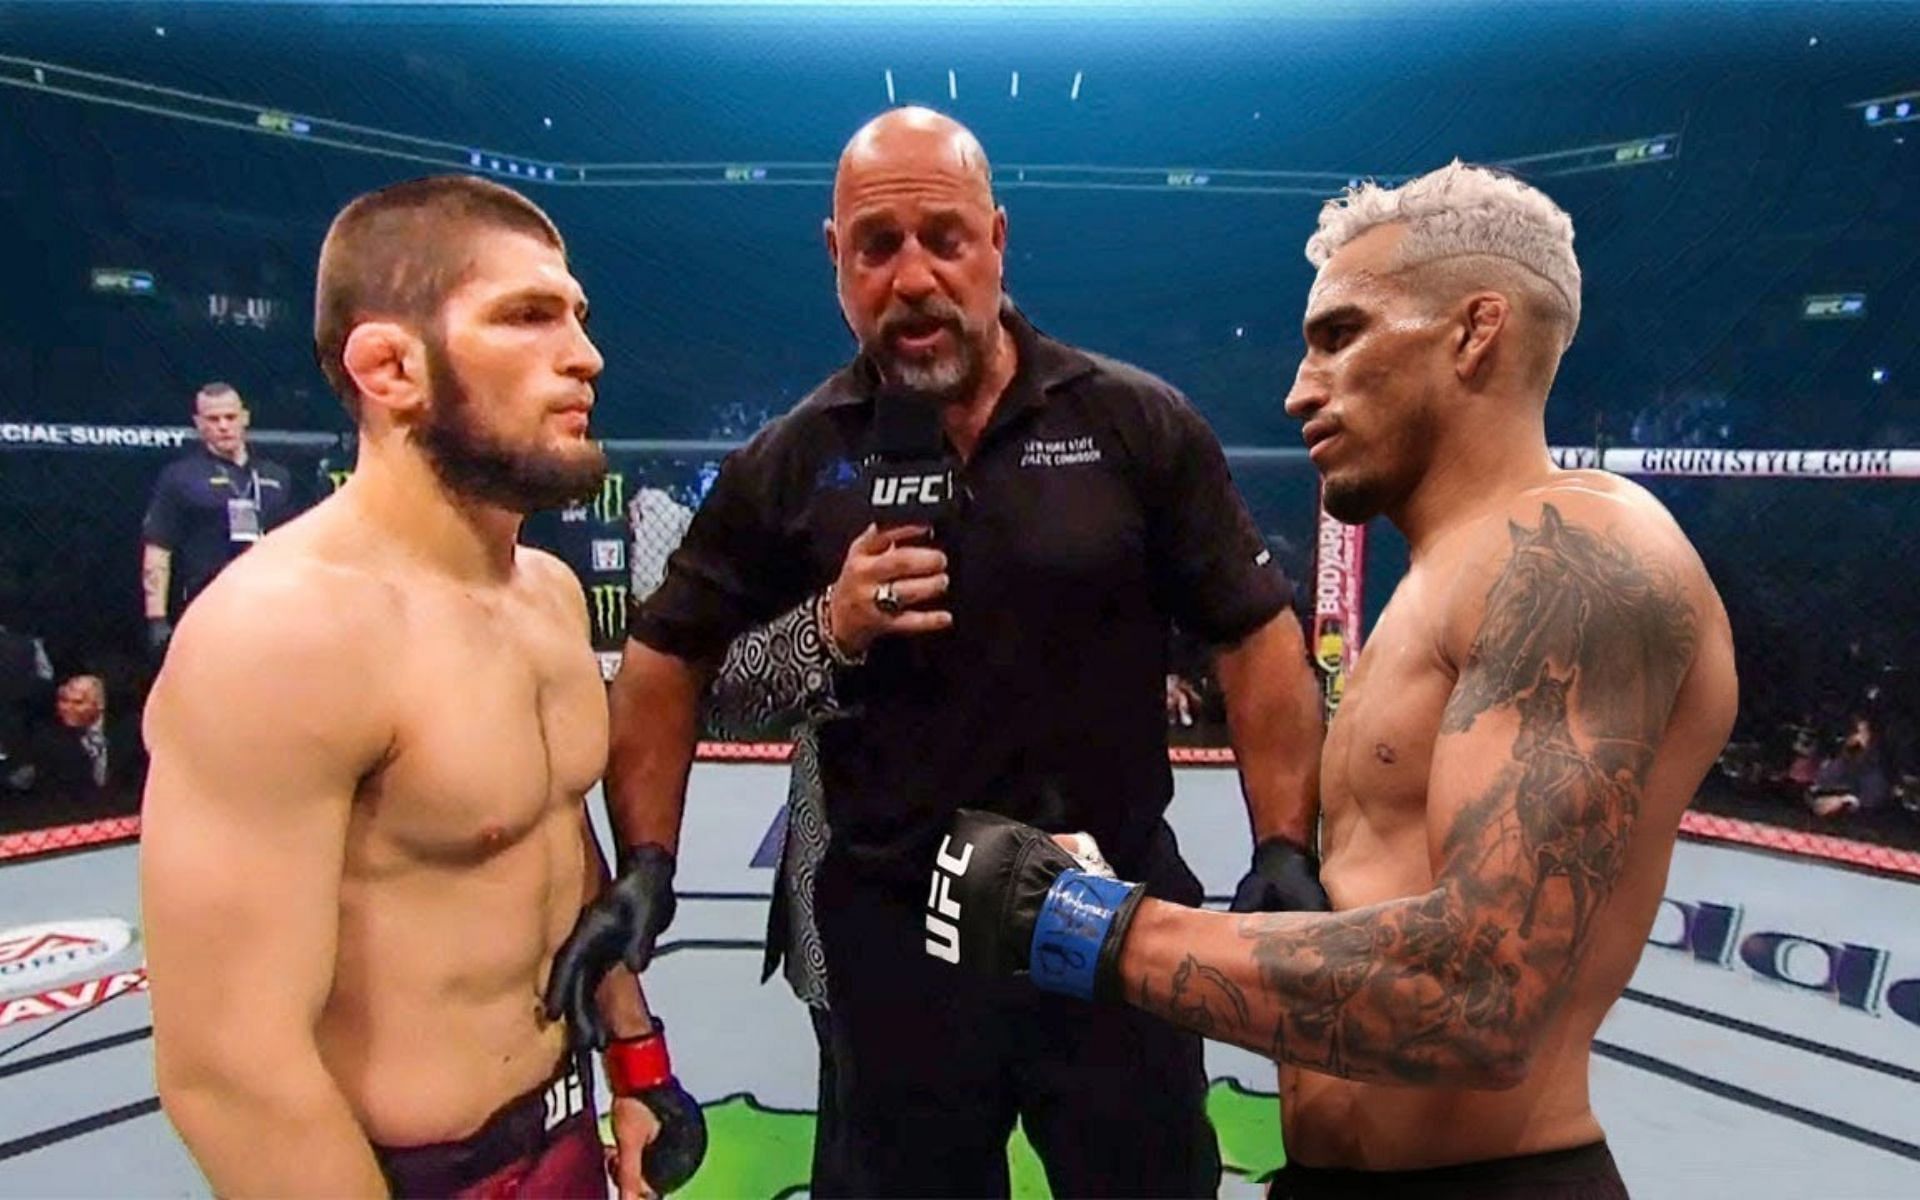 Could Charles Oliveira really defeat Khabib Nurmagomedov if the two men met in the UFC?